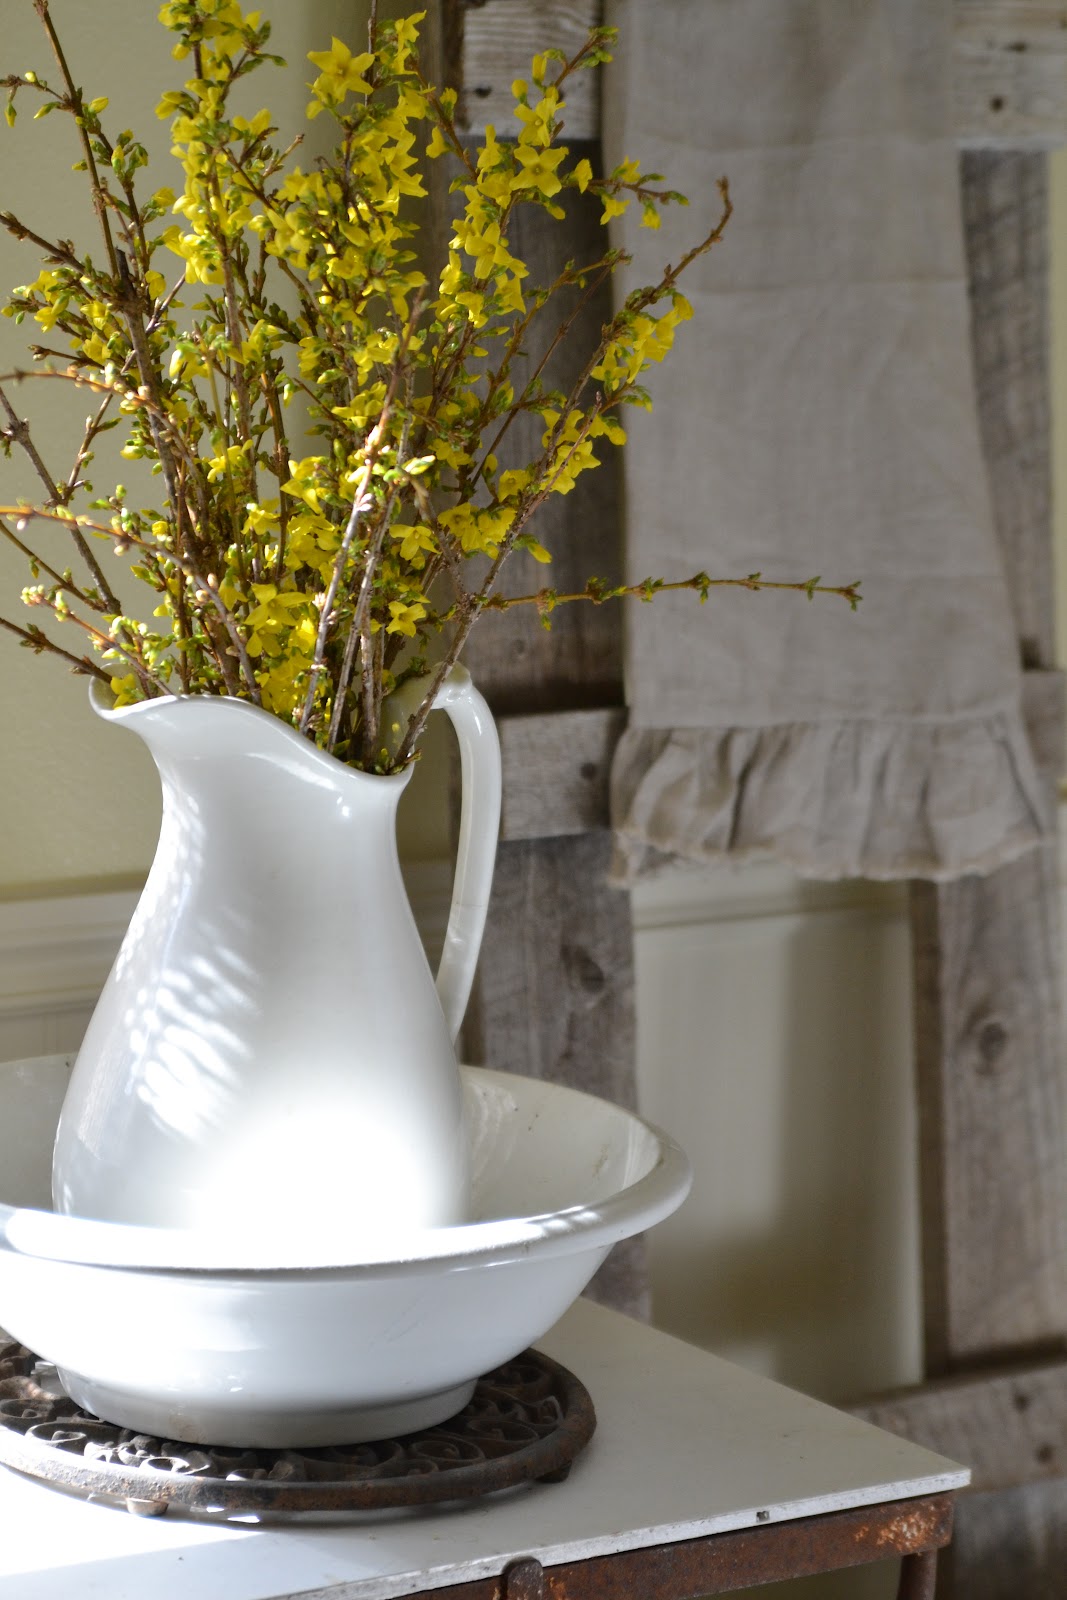 Faded Charm: ~Forsythia Blooms in the Bathroom~